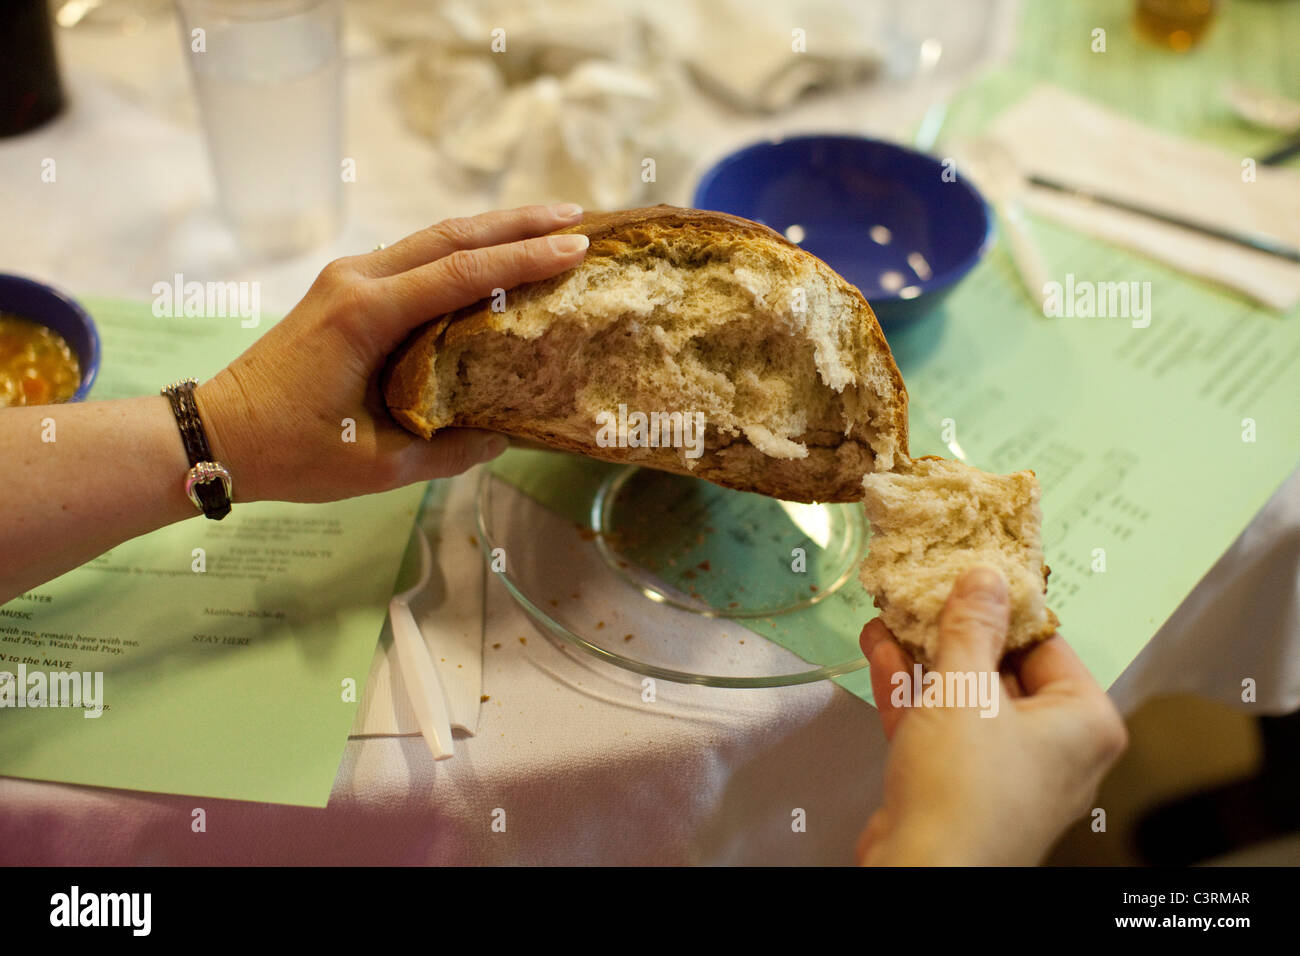 Maundy Thursday observance at St. Martin's Lutheran Church in Austin, Texas, includes simple meal with homemade bread. Stock Photo